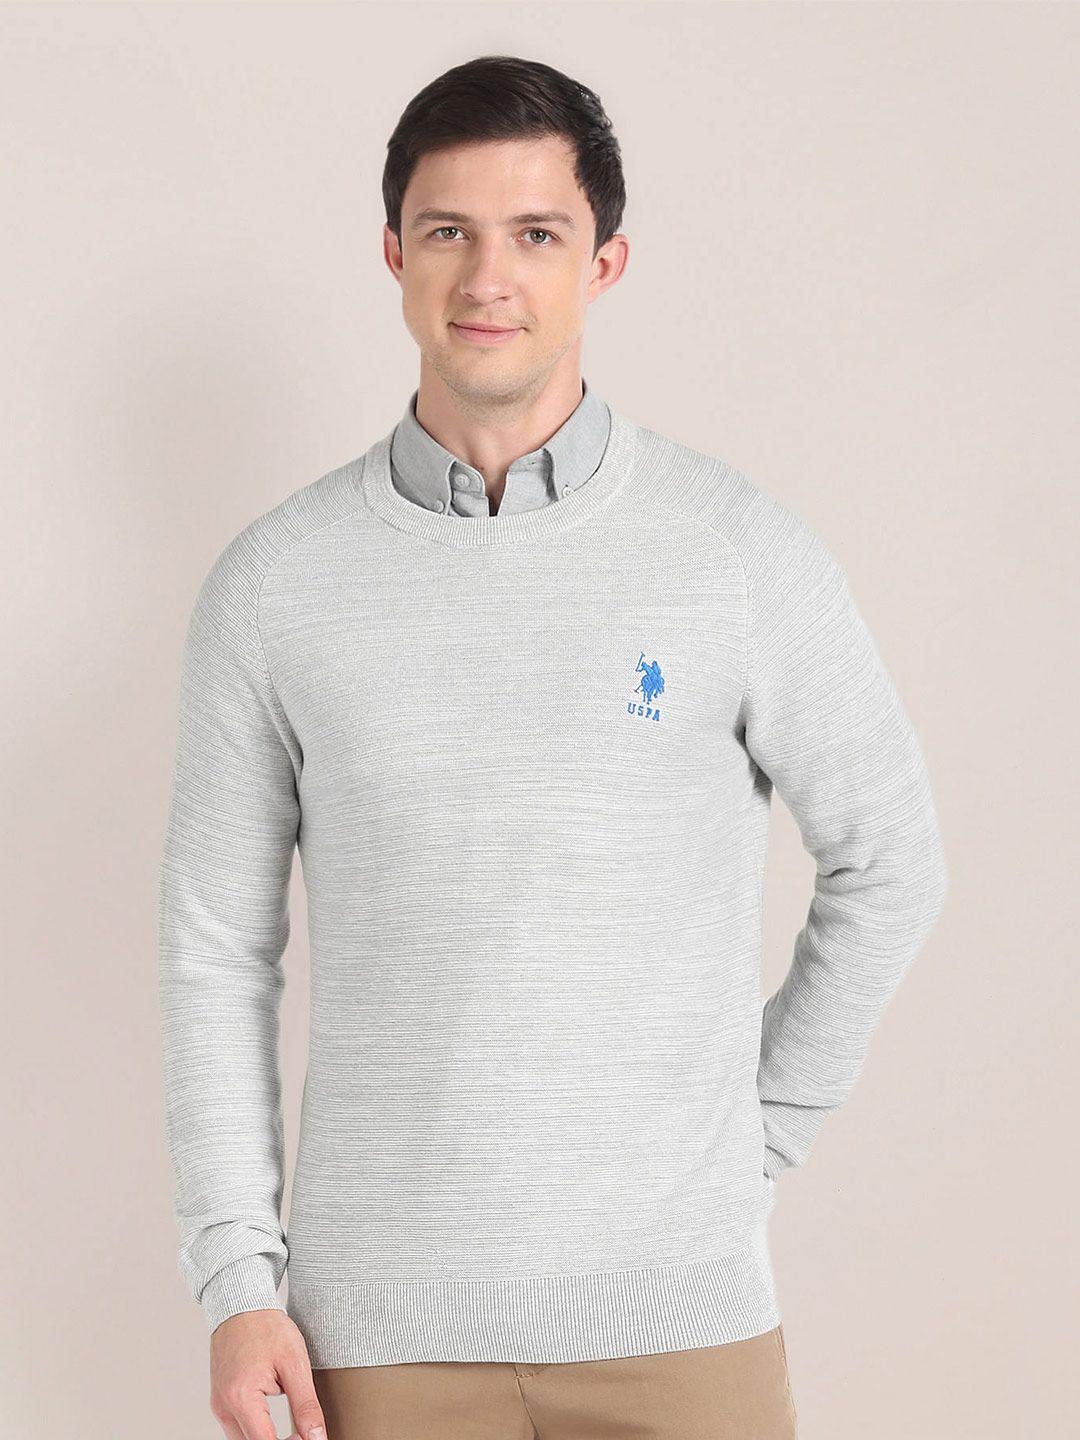 u.s. polo assn. round neck pullover sweater